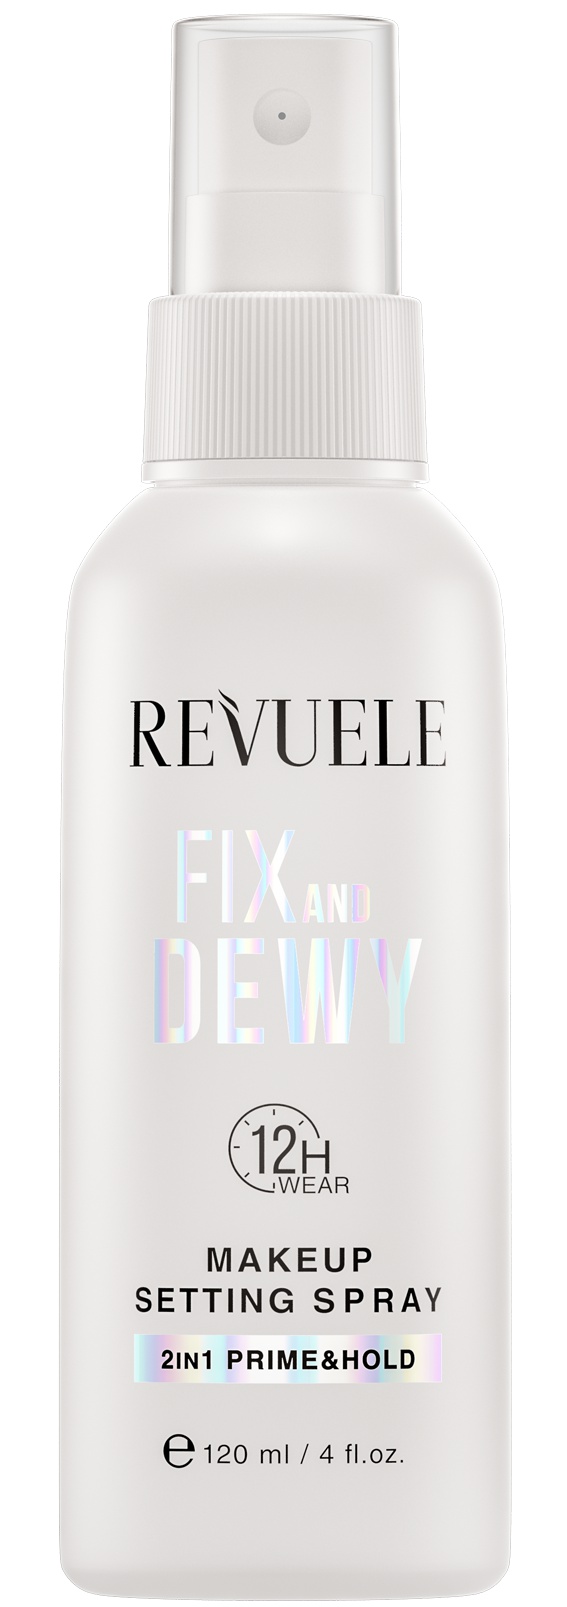 Revuele Fix And Dewy Makeup Setting Spray